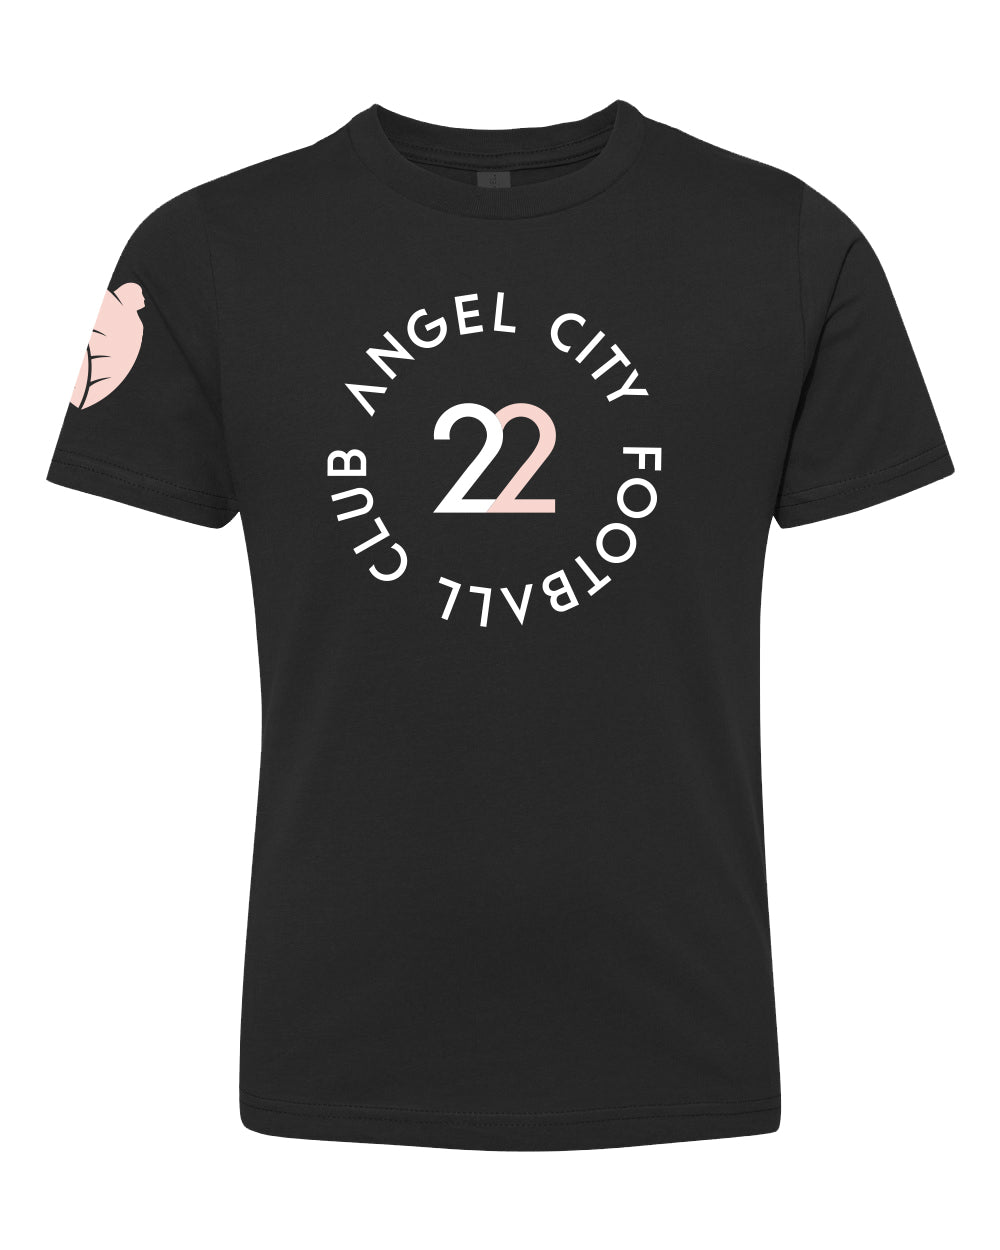 Angel City FC Youth P22 Collection T-Shirt, Black